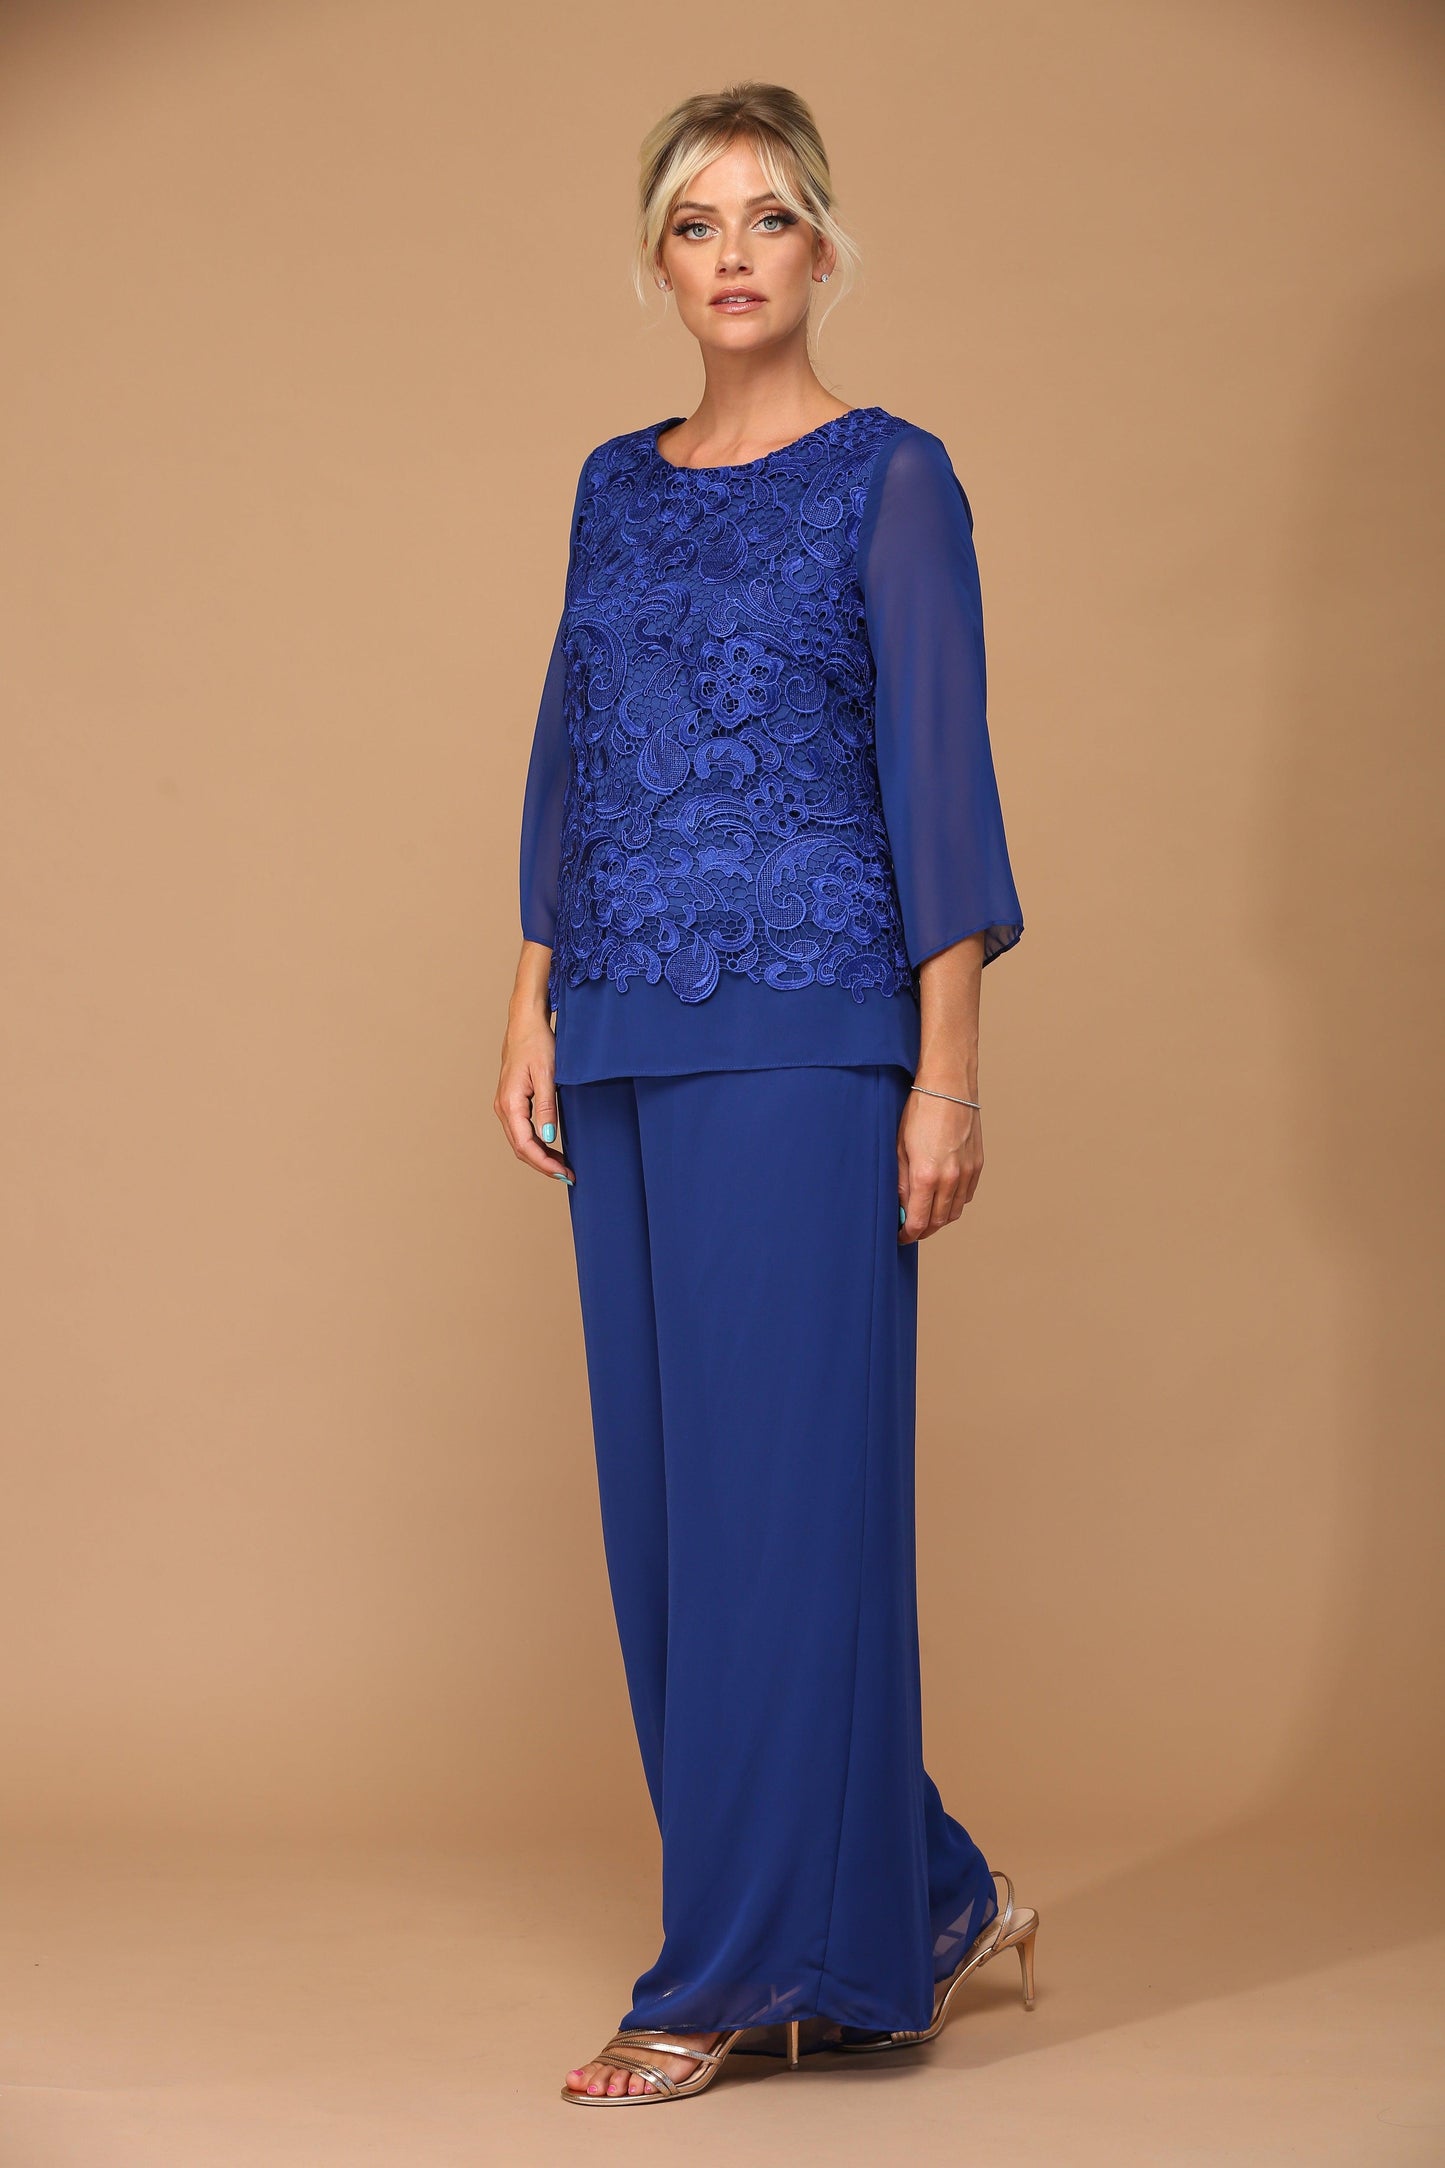 Formal Mother of the Bride Lace Pant Suit